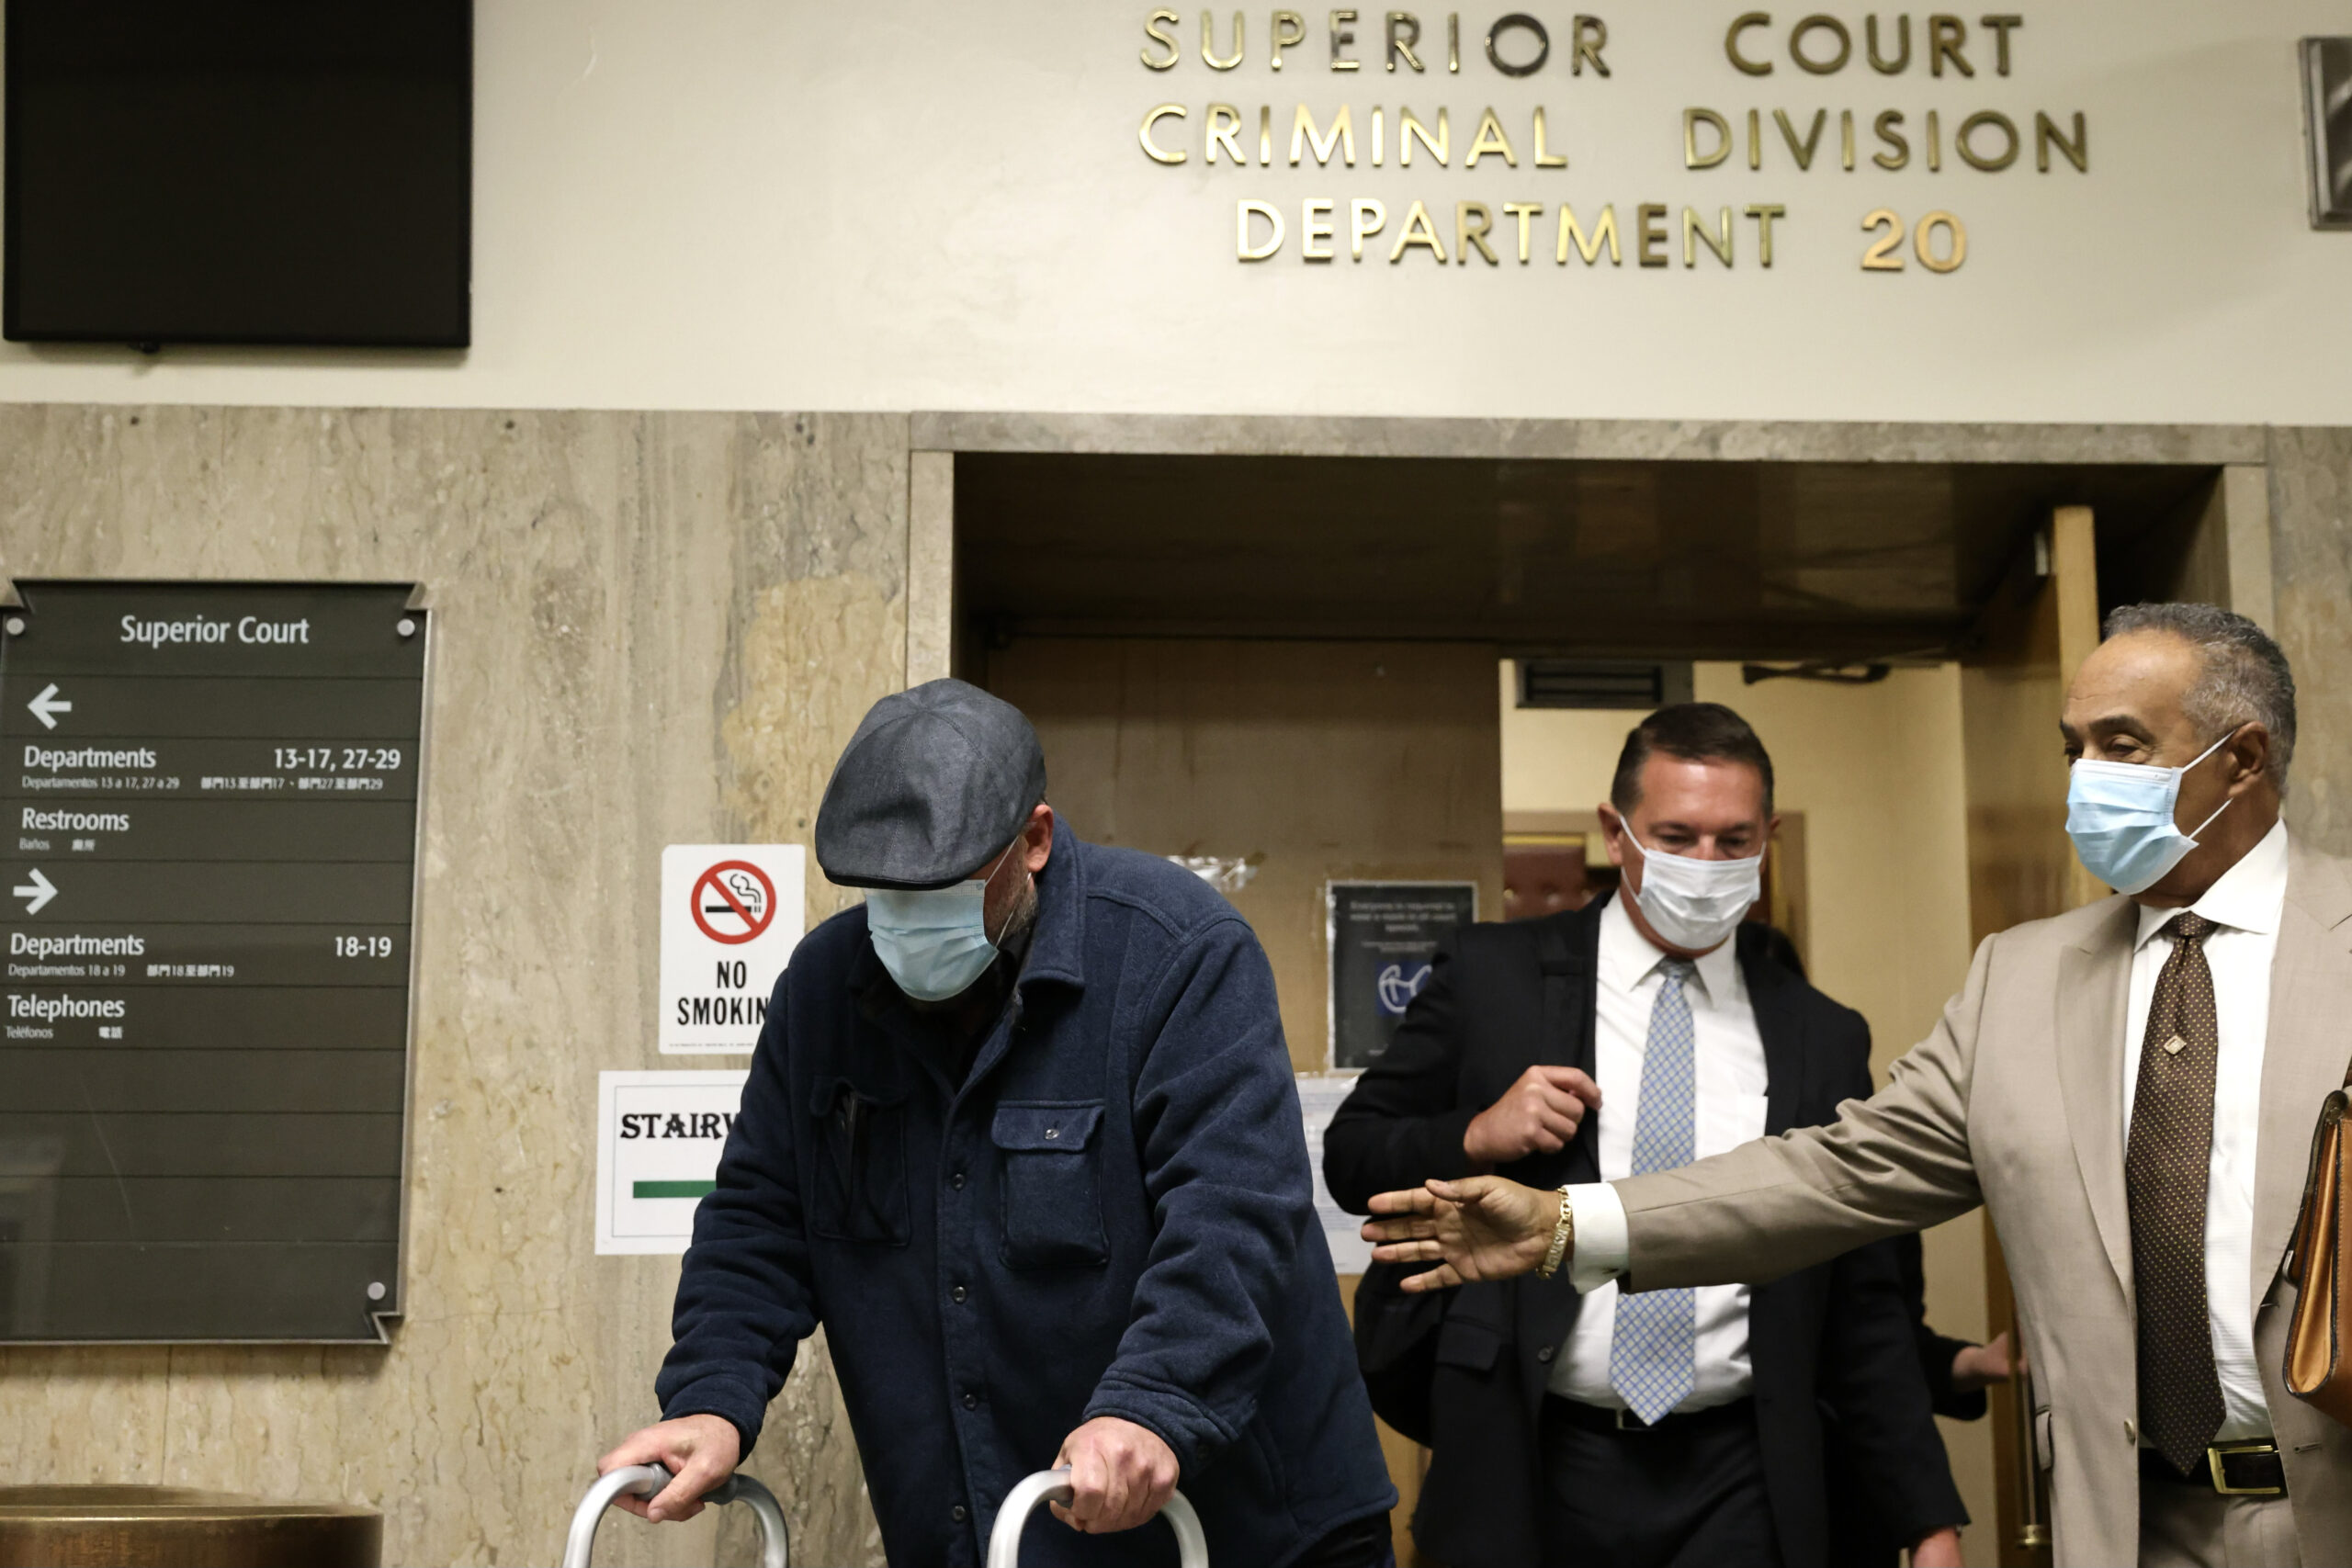 Three men wearing masks walk through a court corridor; one leans on a walker, two appear to assist him.